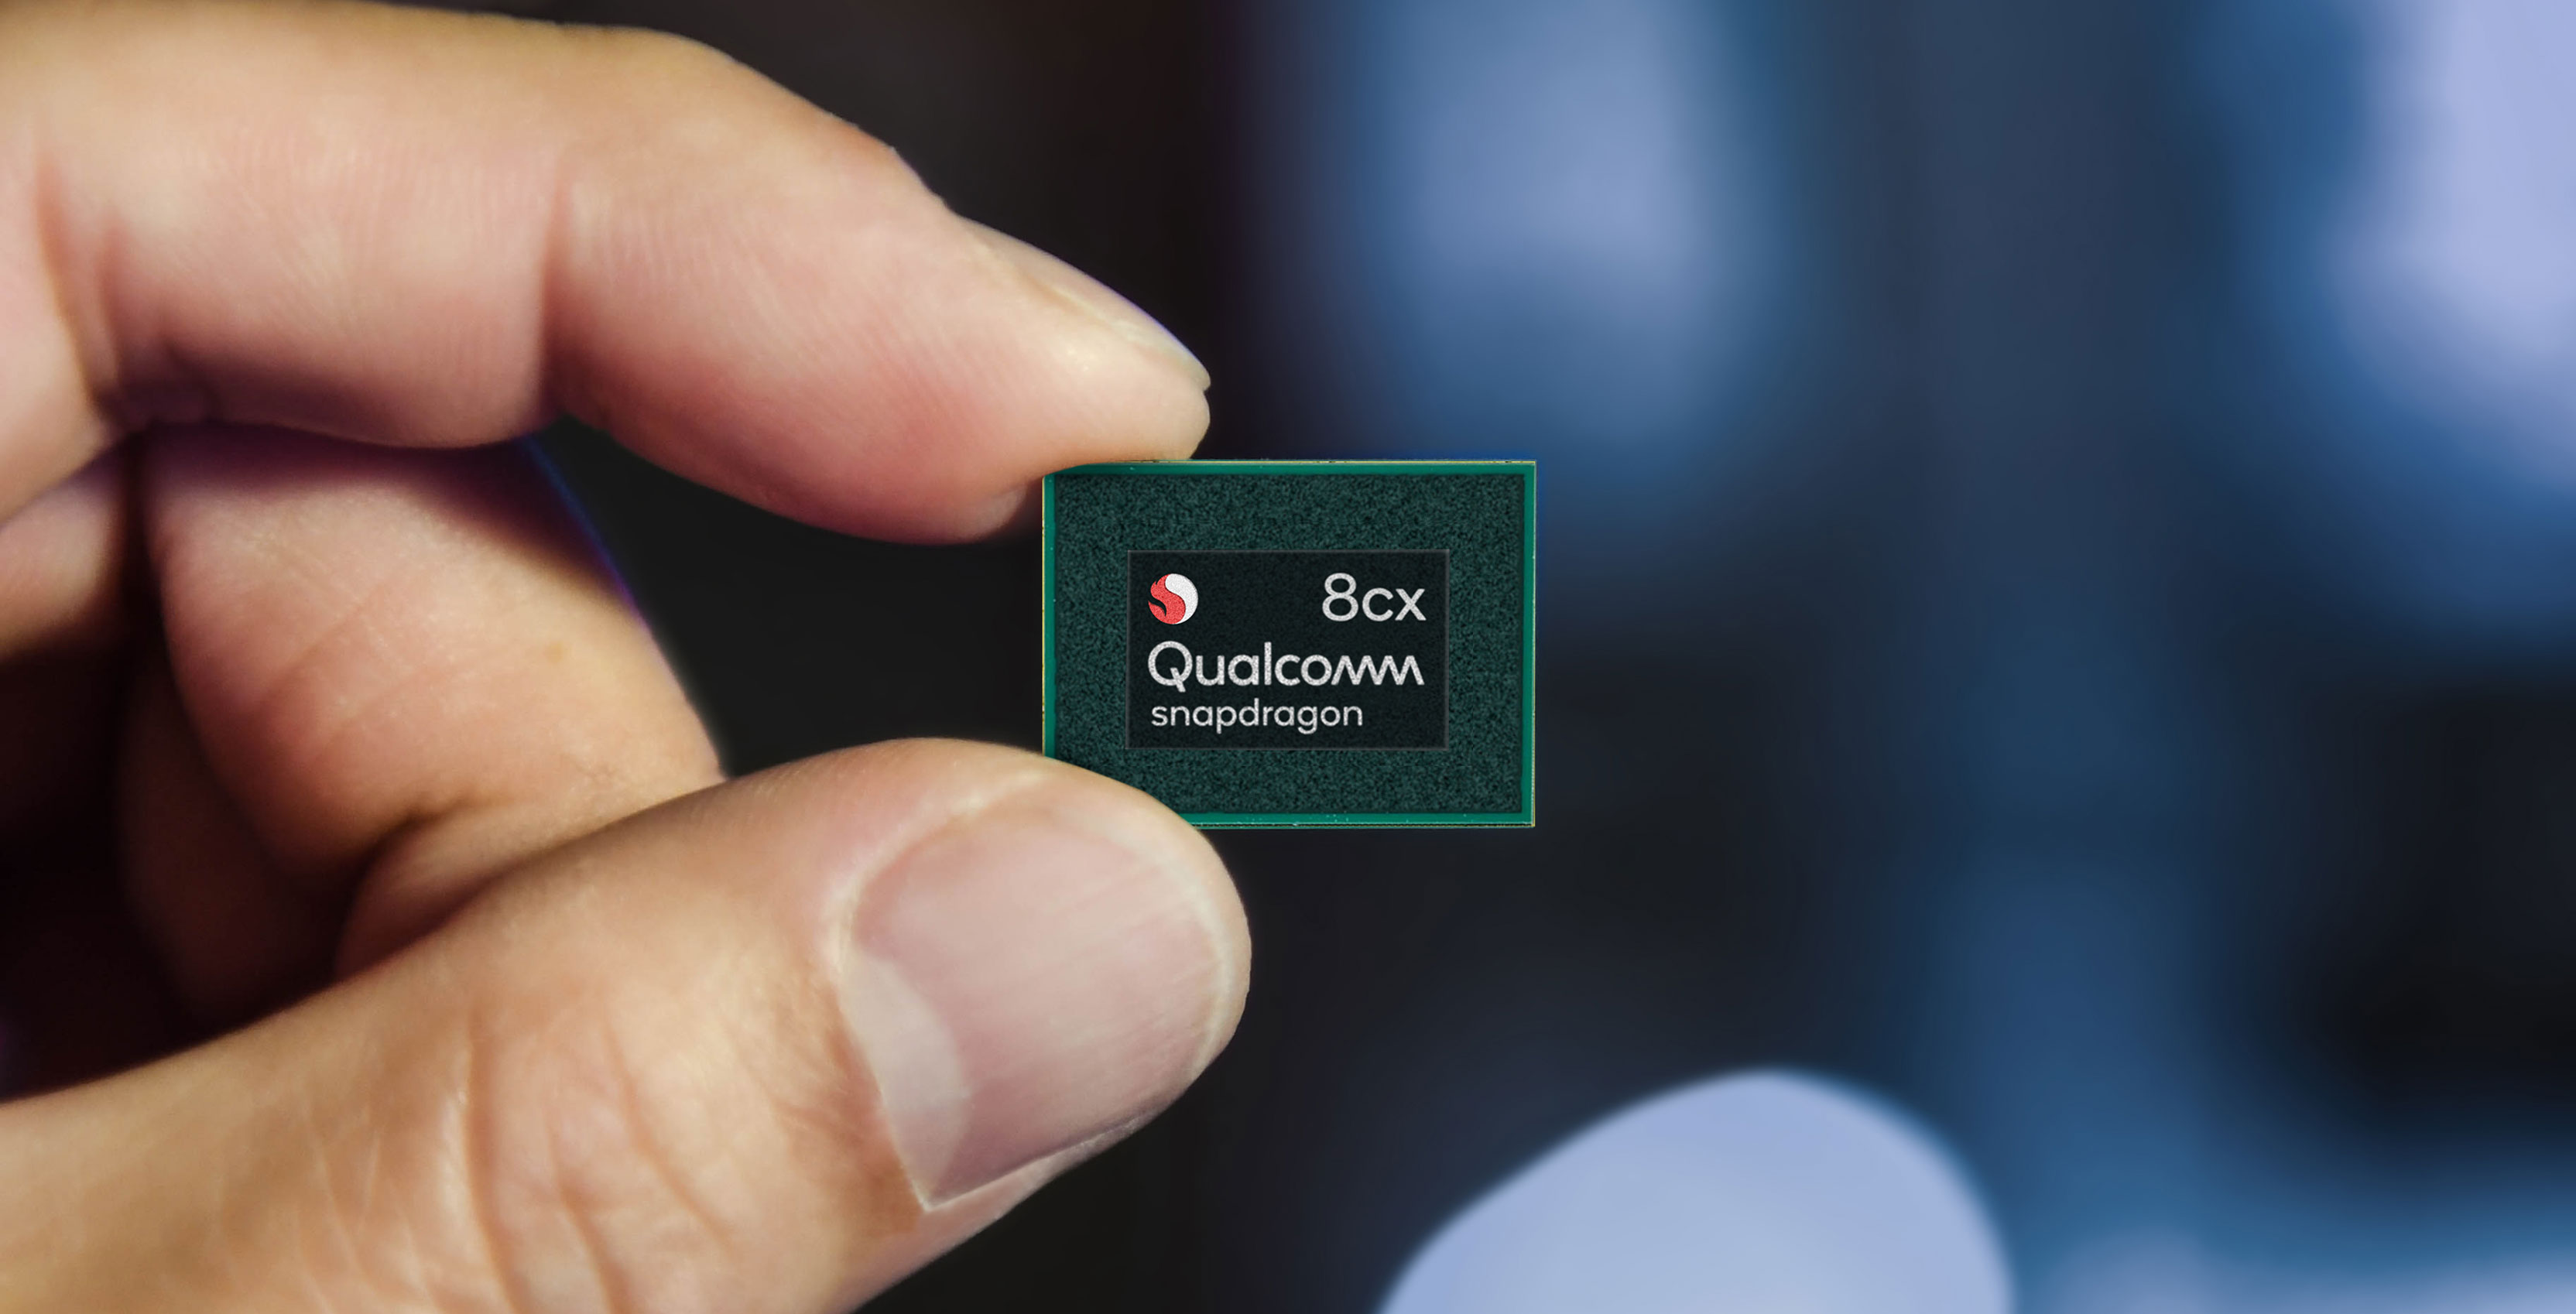 Snapdragon's new 8cx PC chip